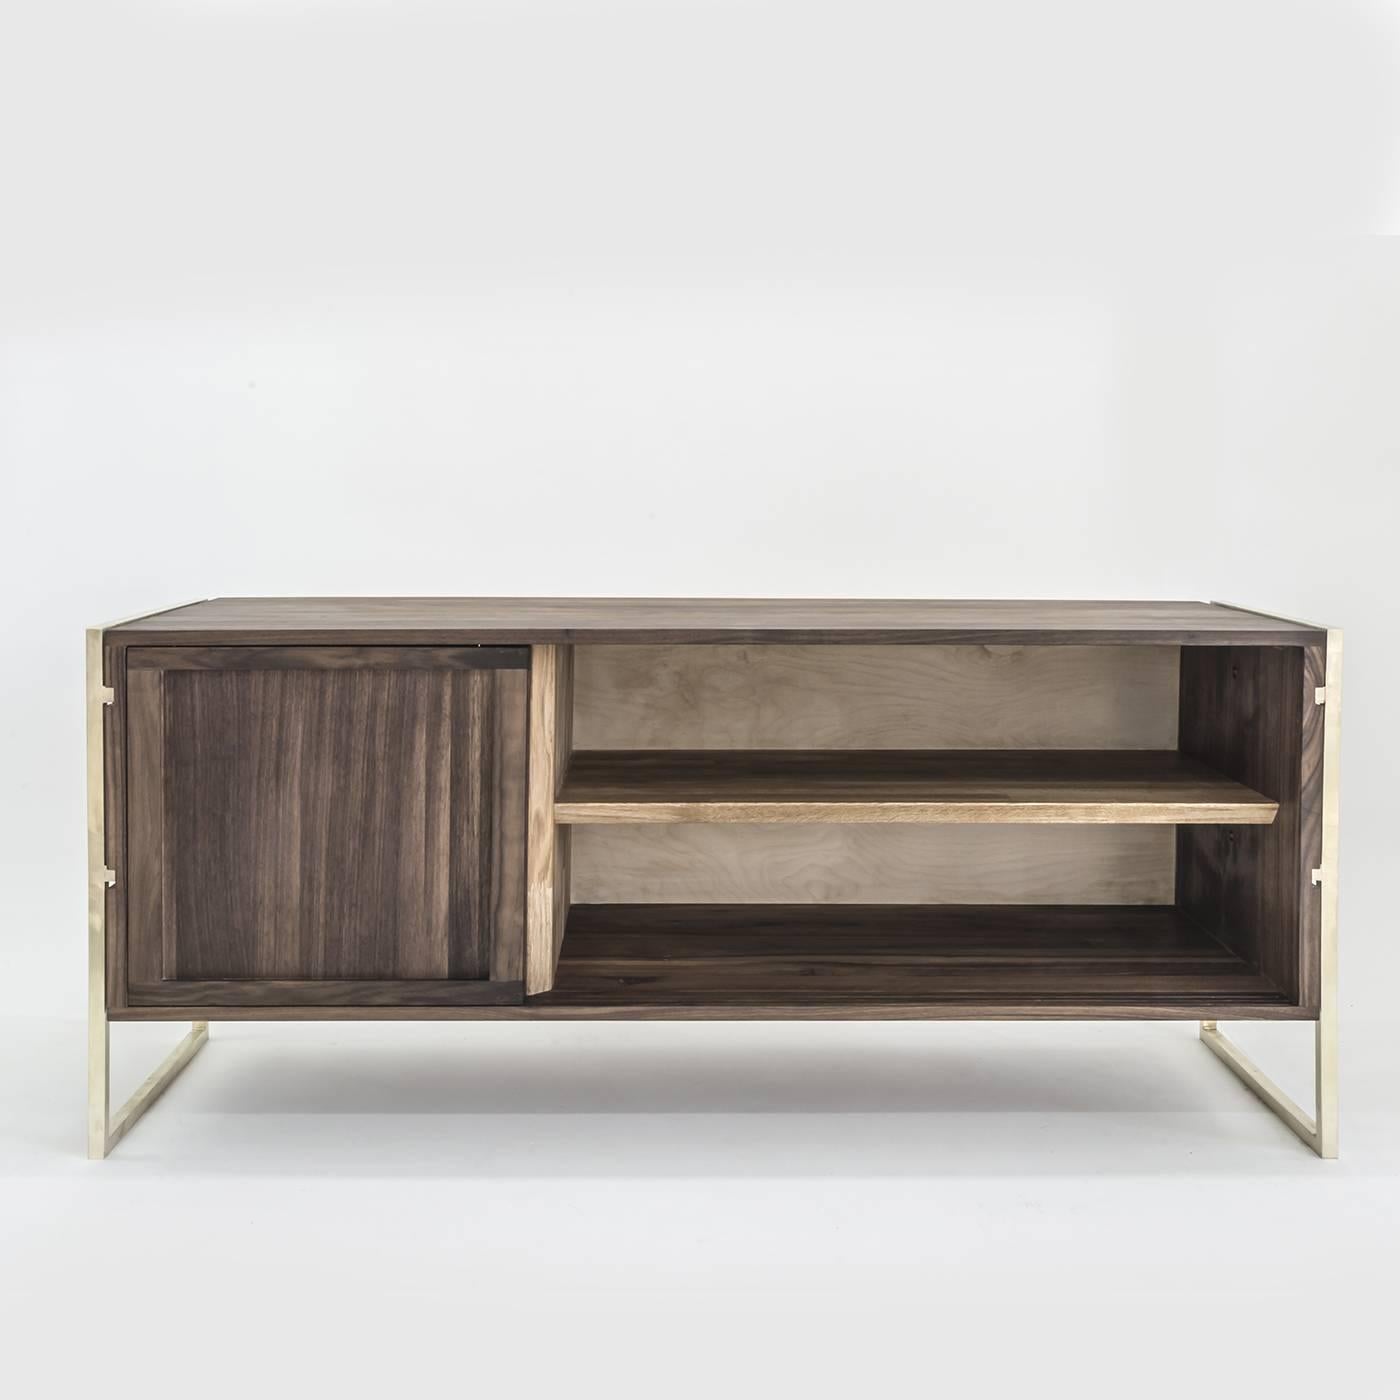 Raised on a polished brass frame, the essential Silhouette of this impeccable sideboard merges style with functionality. Entirely handcrafted of walnut wood, the structure appears to be suspended between the brass supports that hold it via slot-in